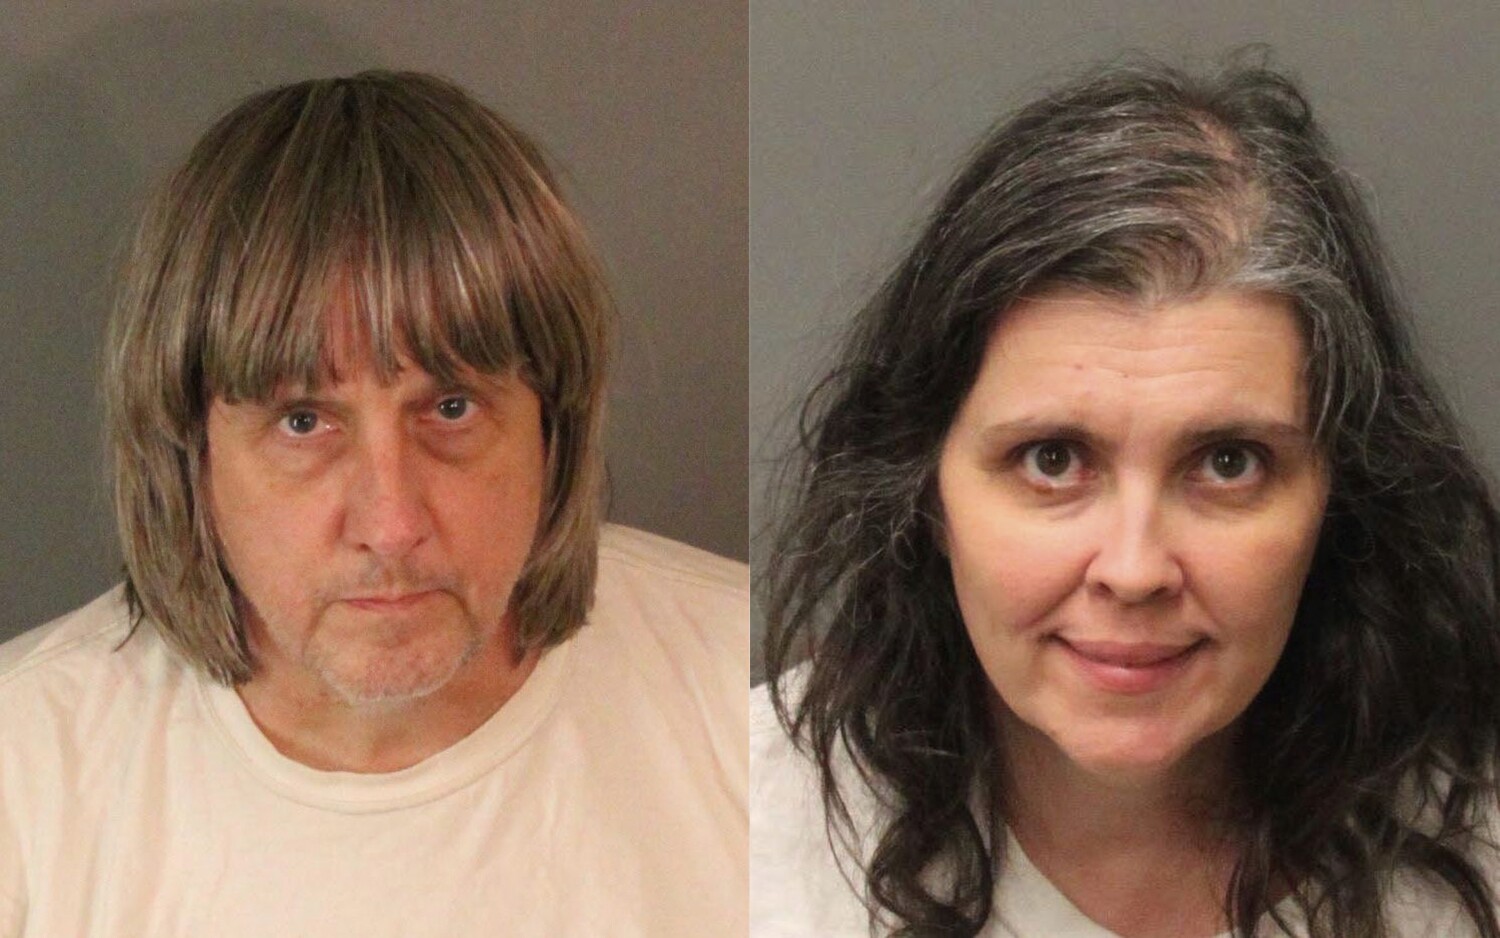 The Turpins were abused by their parents. Riverside County foster care did the same, suits say